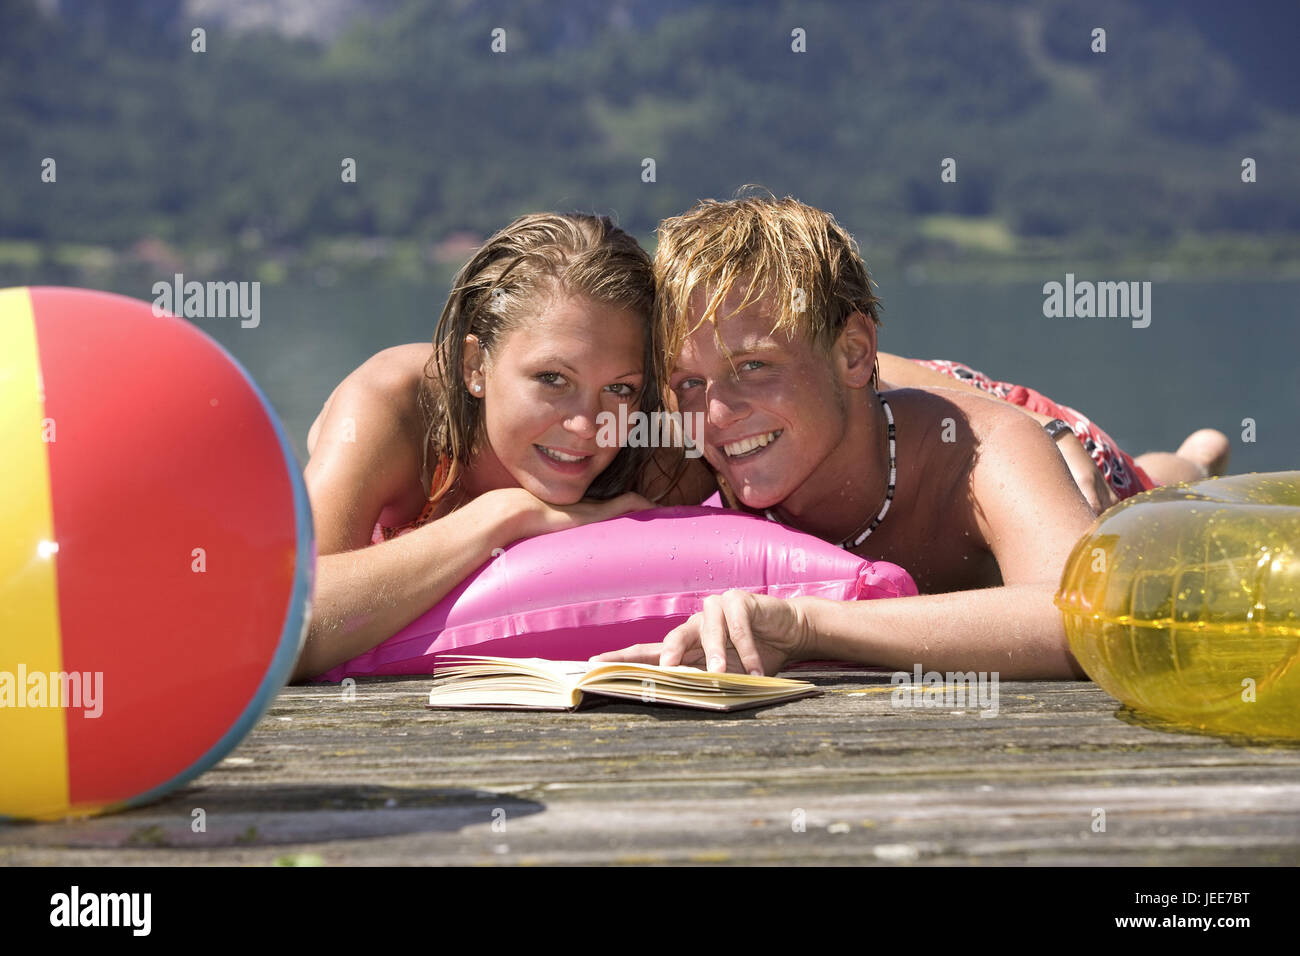 Lakes, bridge, teenager's couple, smile, lie, read book, portrait, person, youth, teenager, young persons, couple, love, affection, holidays, leisure time, summer, beach-ball, ball, pneumatically, touch, holiday flirtation, air bed, happily, falls in love, sun themselves, détente, Stock Photo